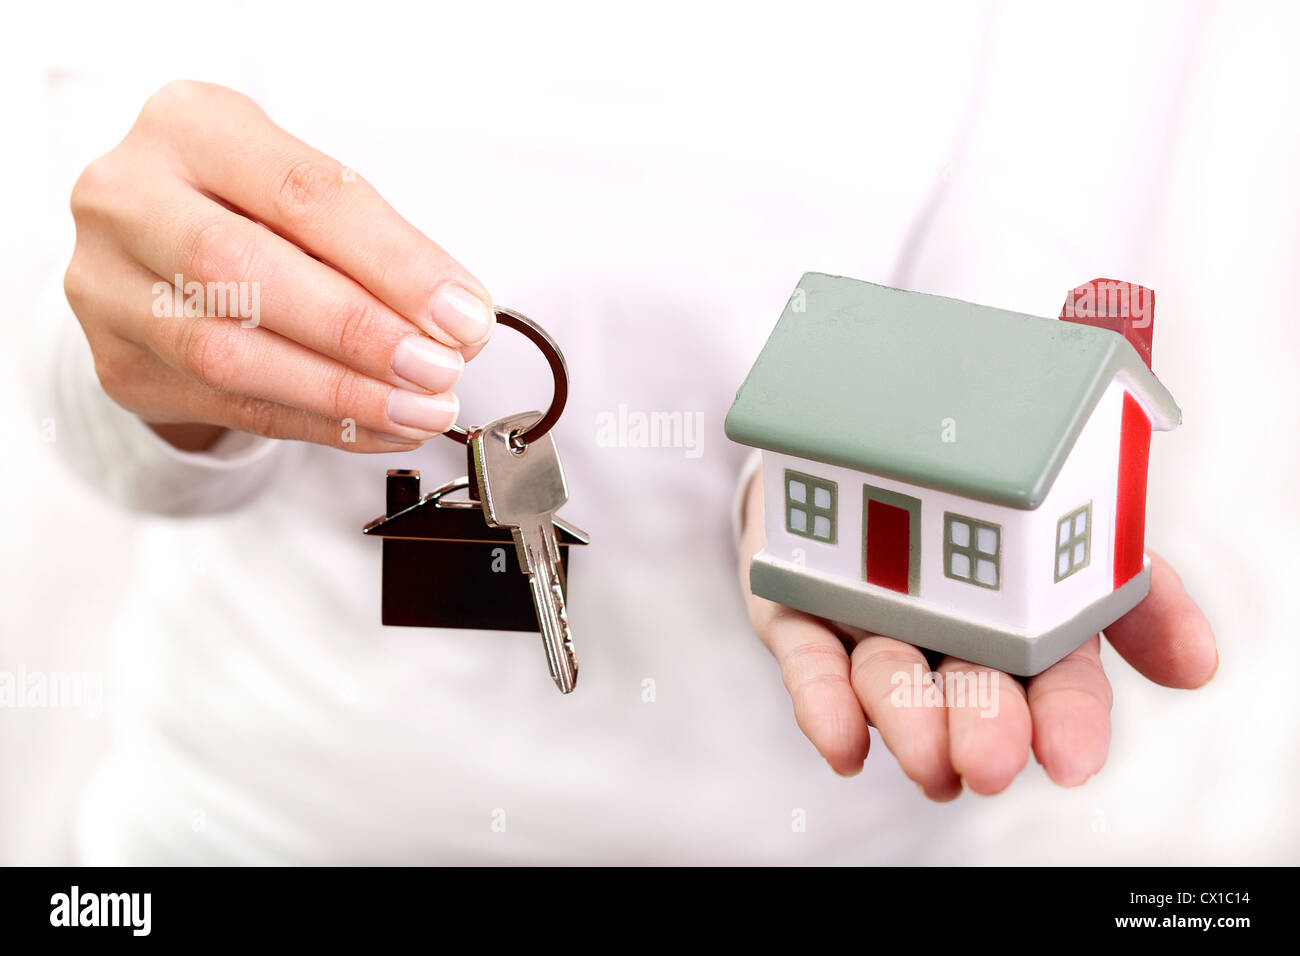 Miniature model house and keys resting on a female hand Stock Photo